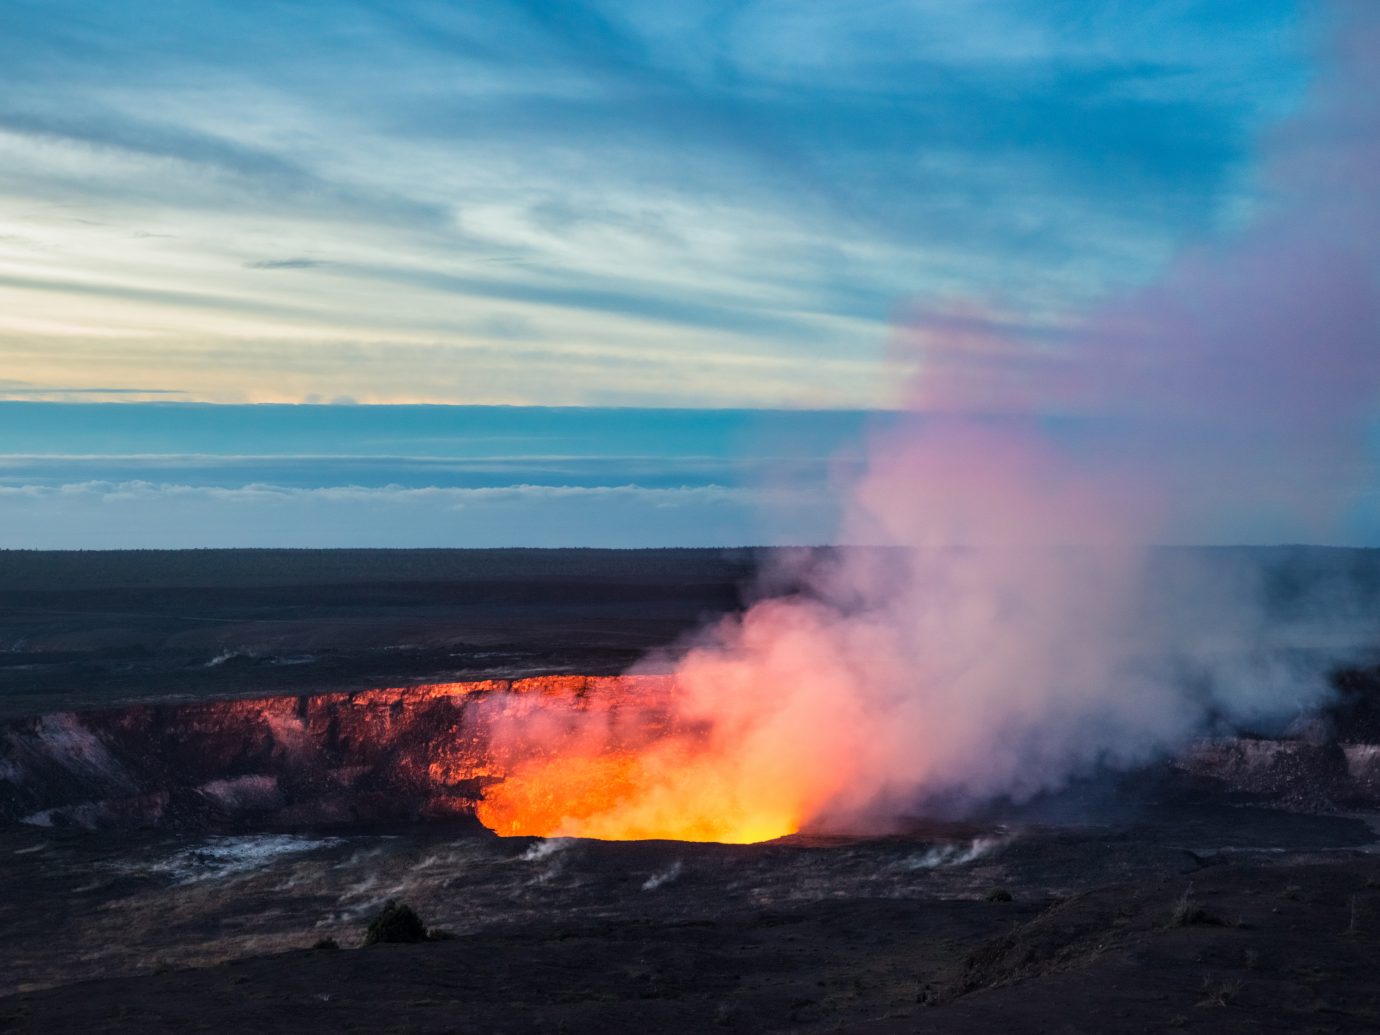 Fire and steam erupting from Kilauea Crater in Hawaii